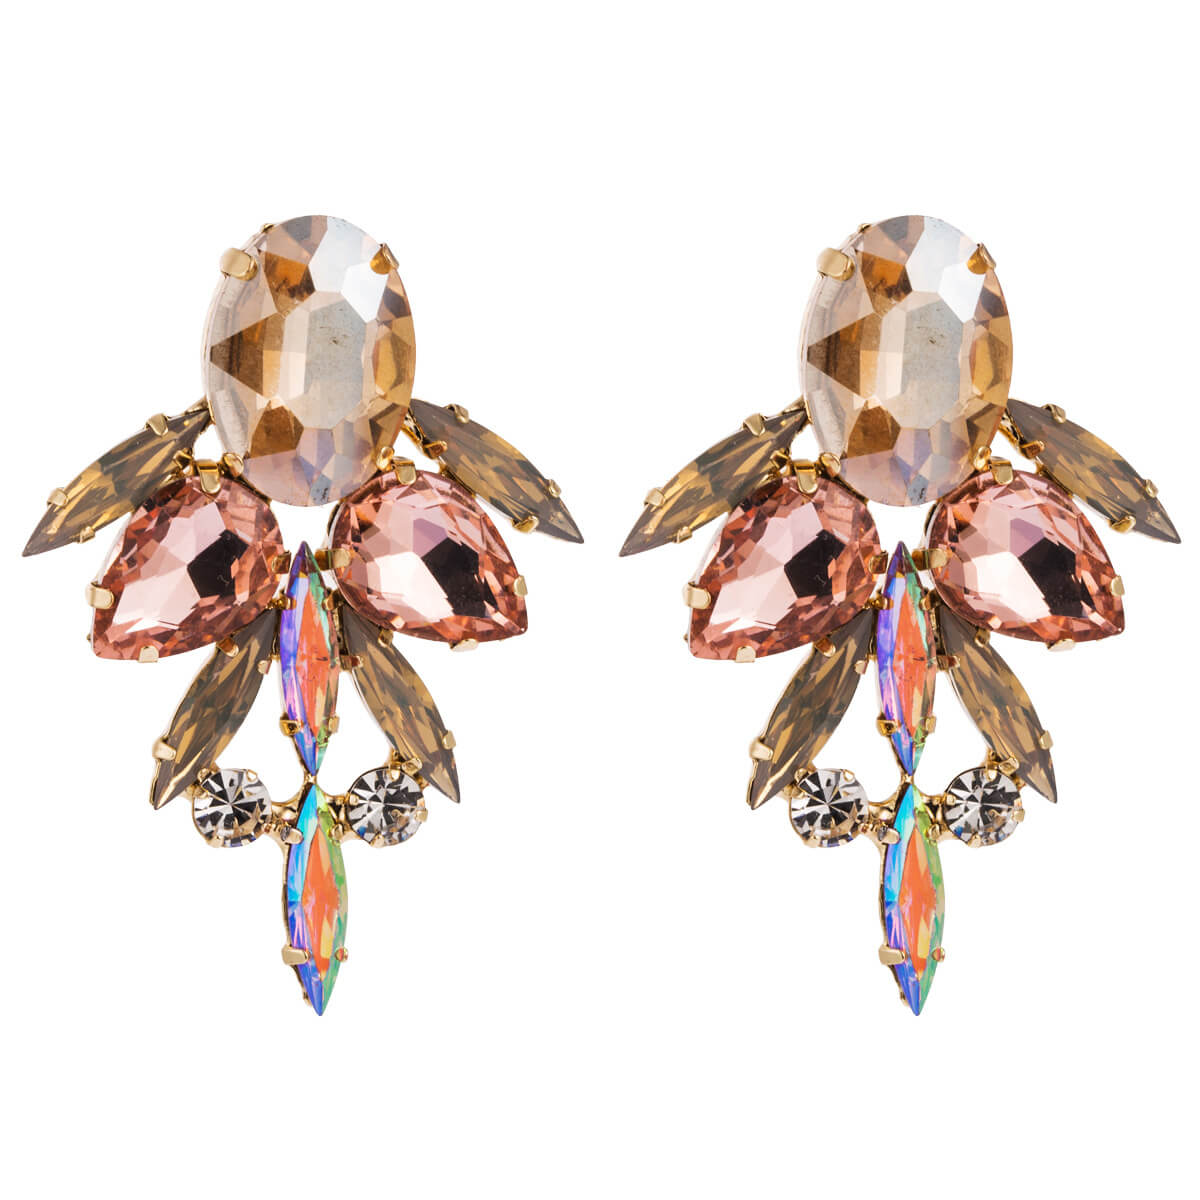 Close up of Geometric design Champagne coloured Rhinestone and diamante Earrings Set in gold alloy